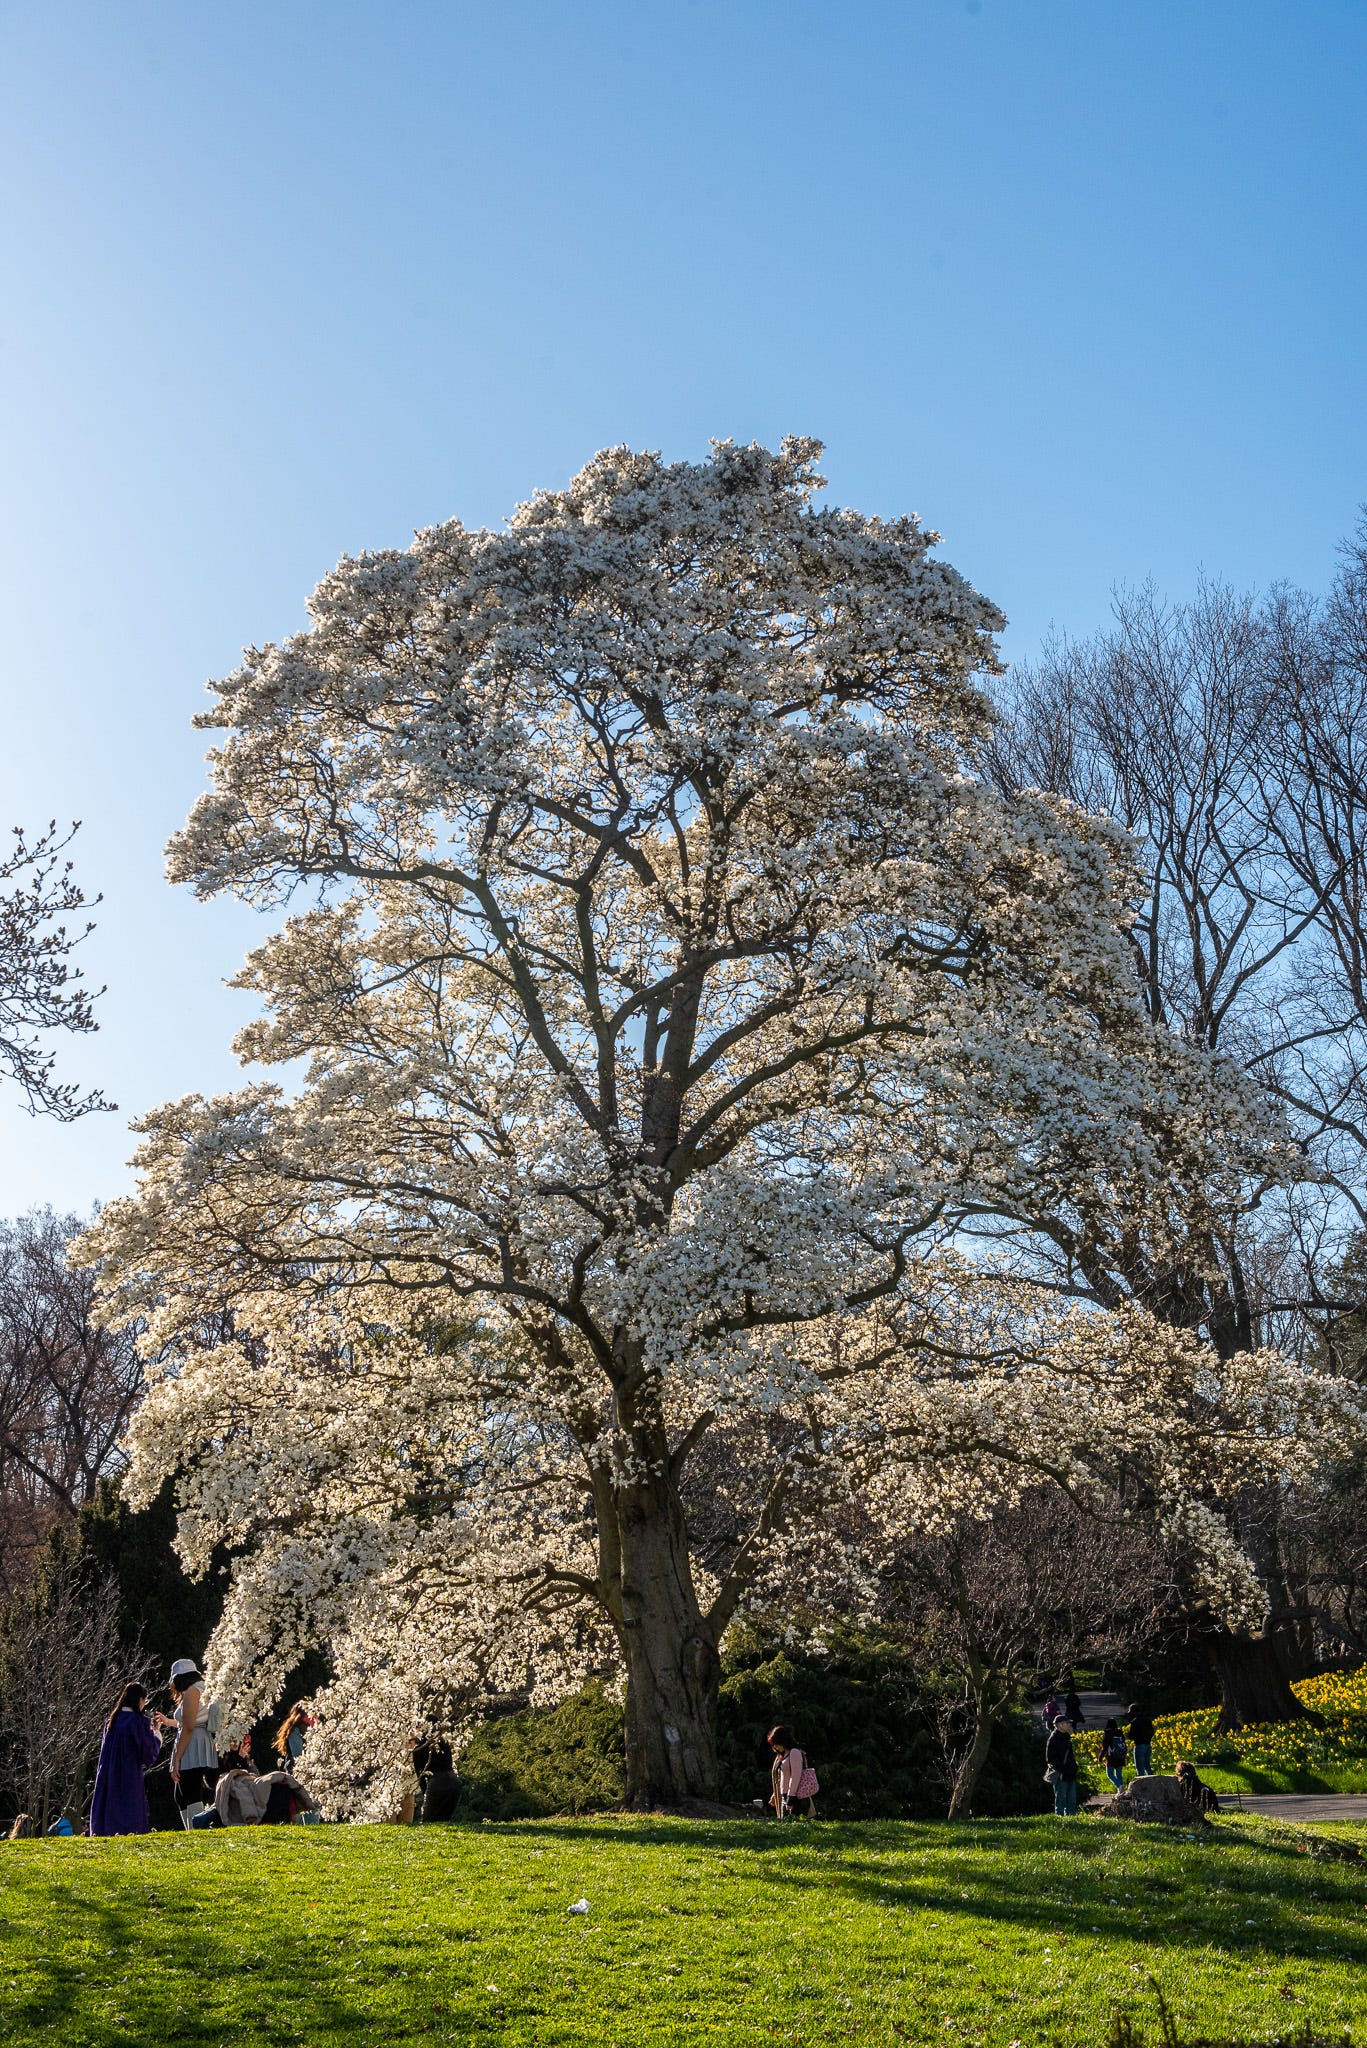 ID: A stately white flowering magnolia specimen, standing tall against a blue sky